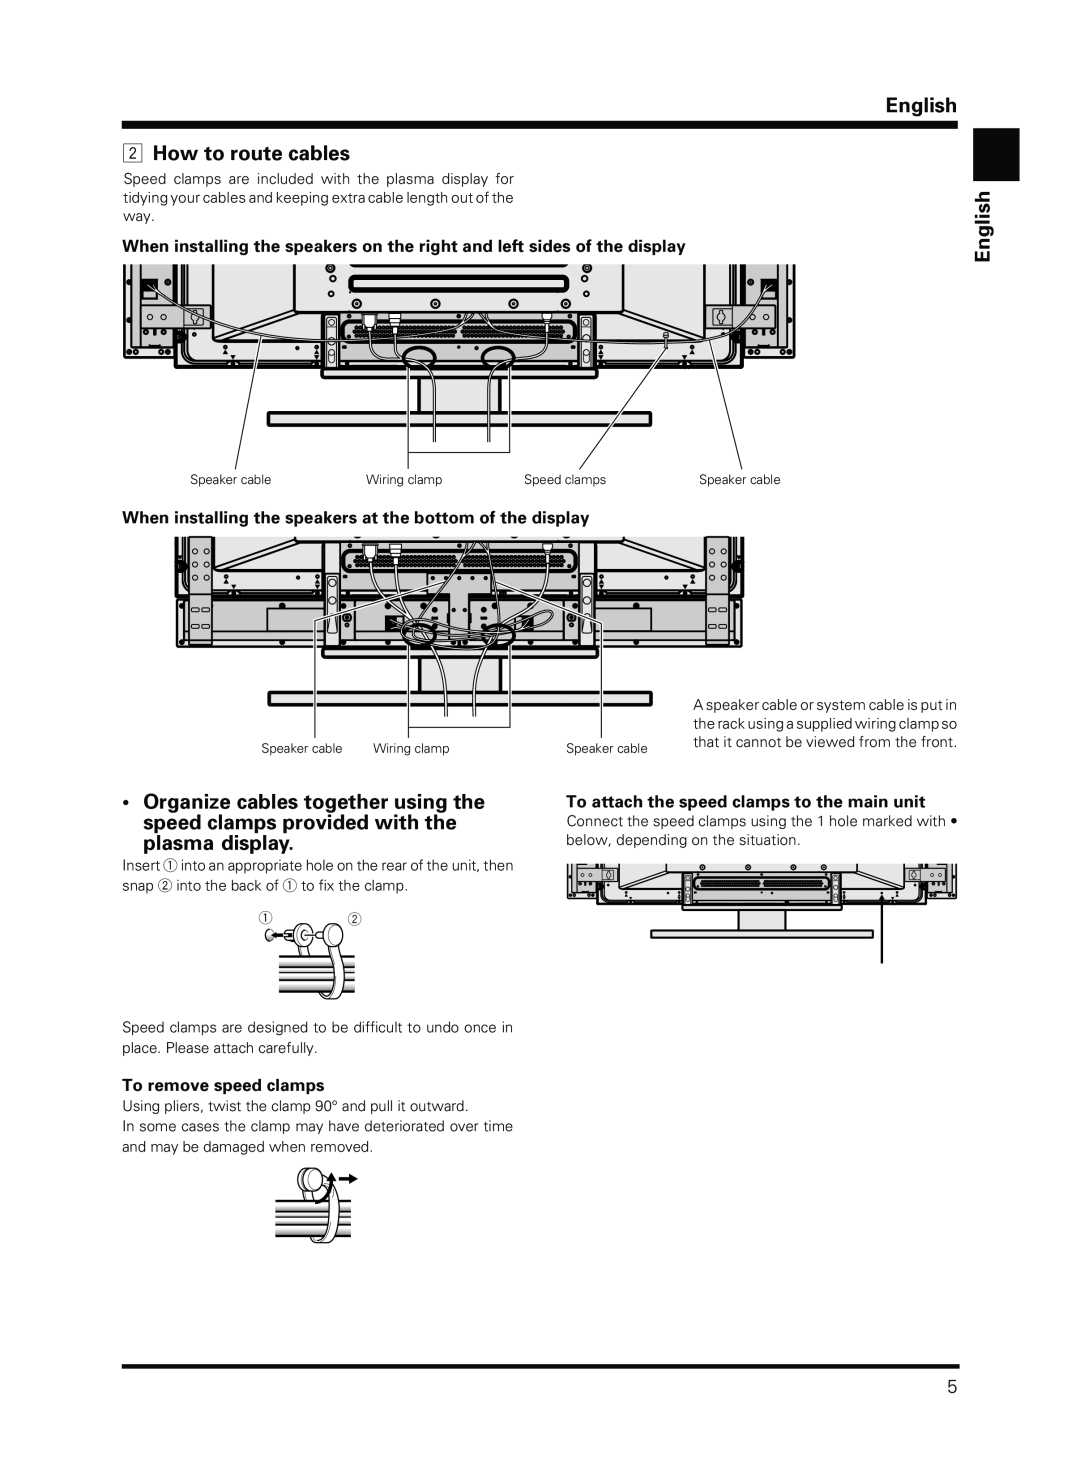 Pioneer PDP-S13-LR manual How to route cables, English English, When installing the speakers at the bottom of the display 